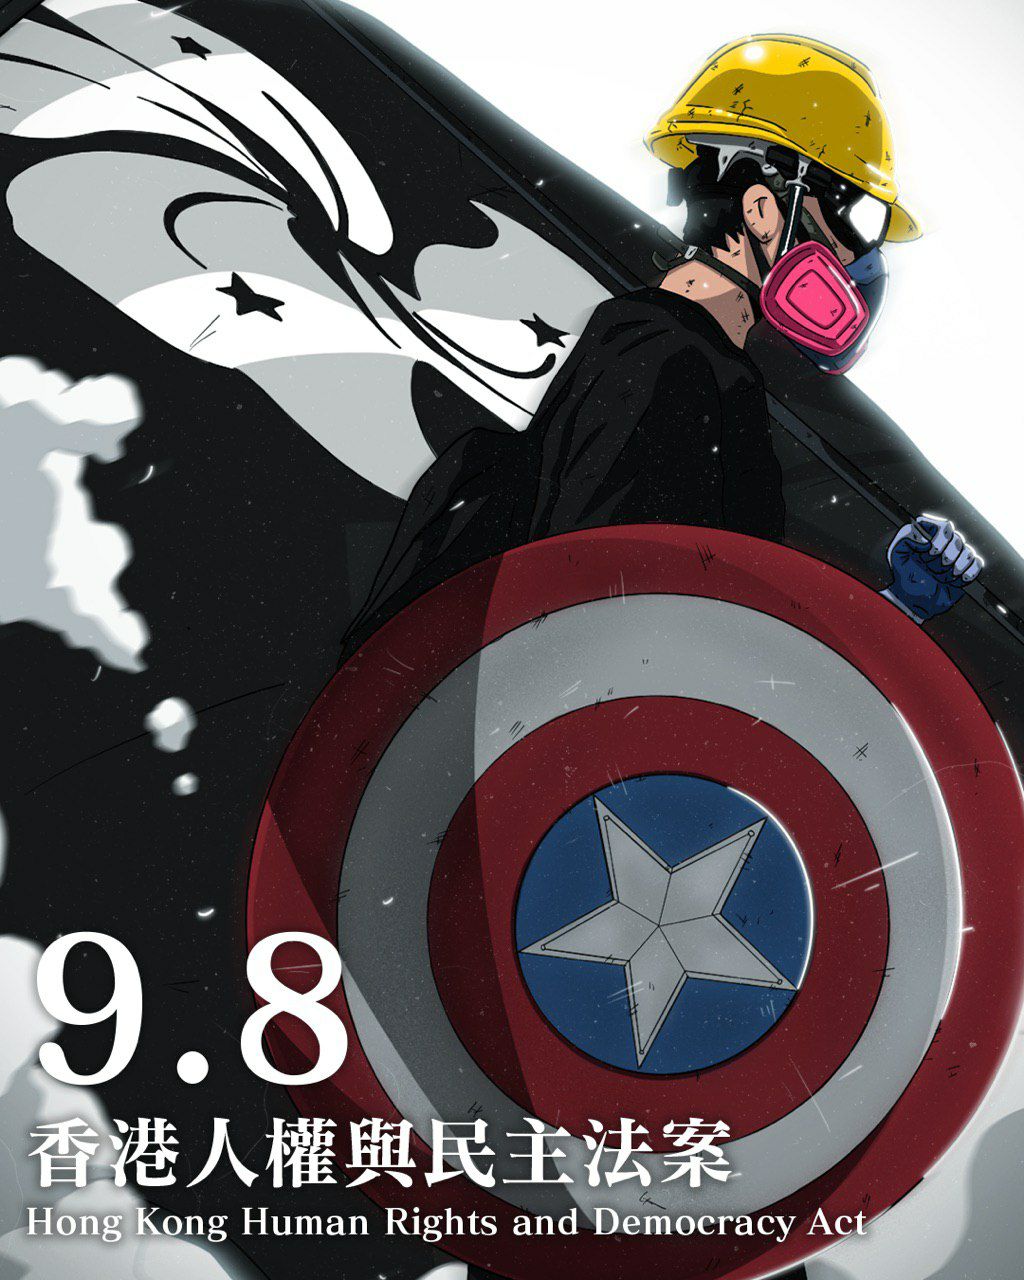 Illustration of a frontline protestor in hard hat and half-face respirator, in profile. He is carrying a black bauhinia flag and a Captain America shield. Text on the bottom left reads: 9.18 Hong Kong Human Rights and Democracy Act.